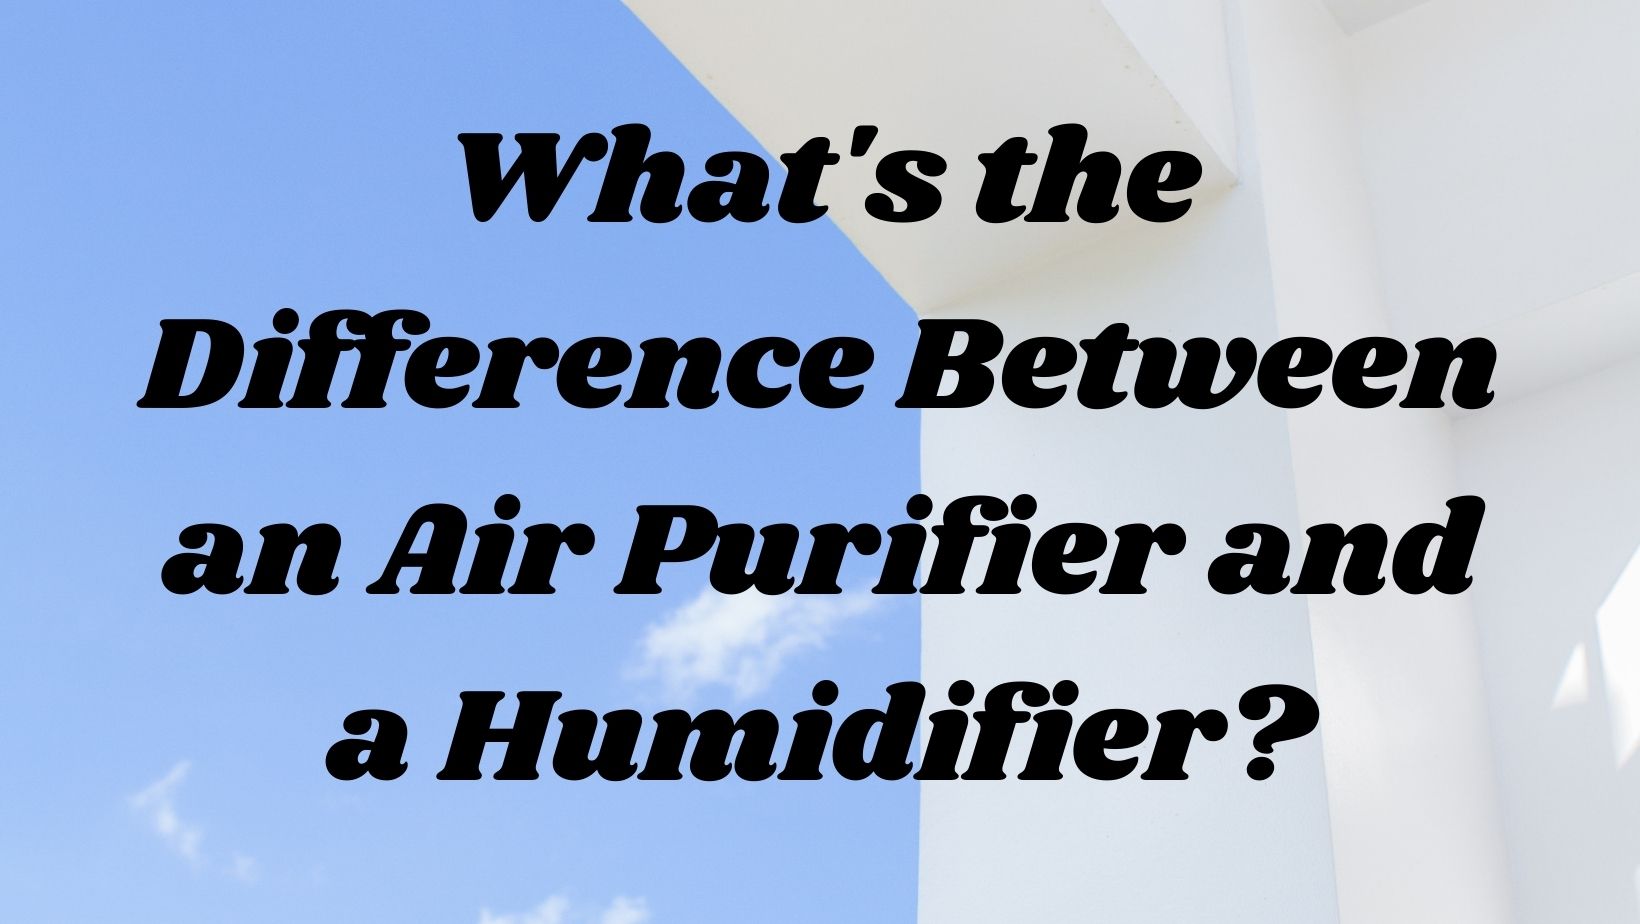 What's the Difference Between an Air Purifier and a Humidifier